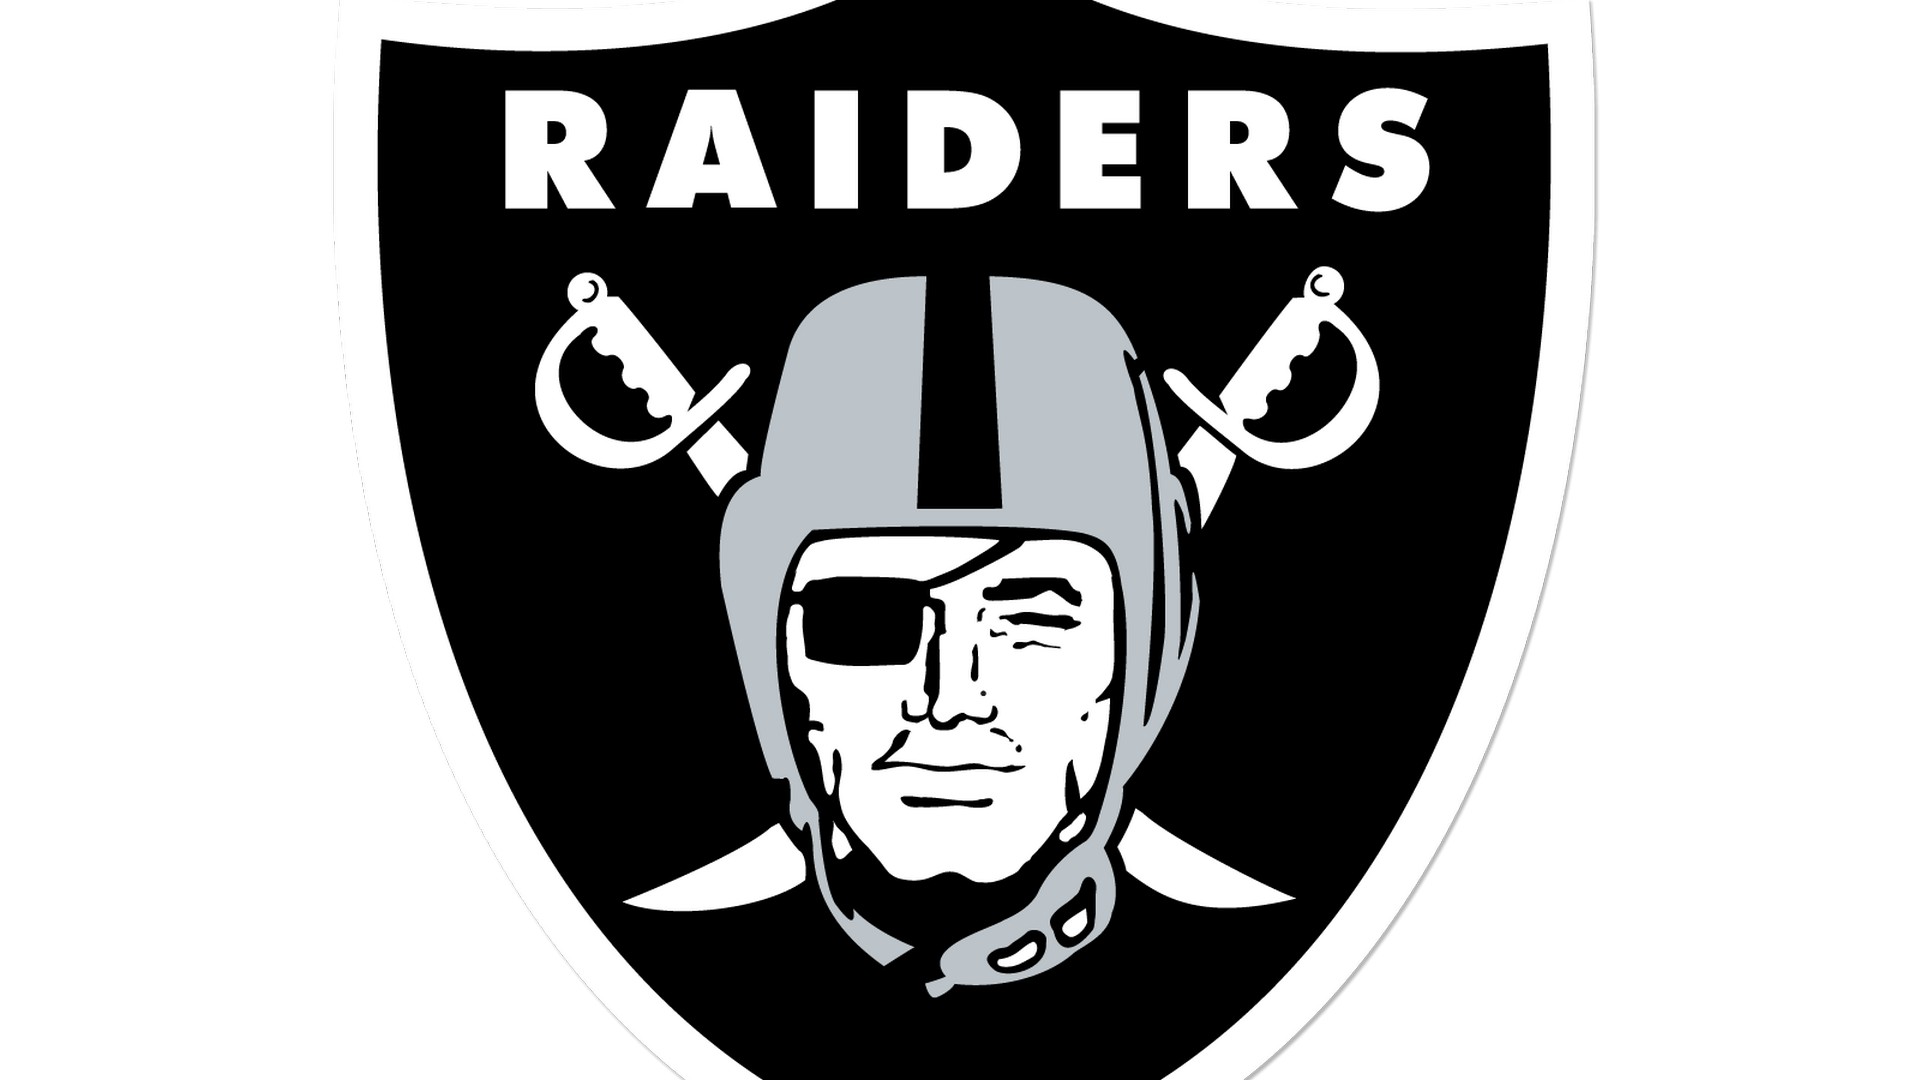 Oakland Raiders Desktop Wallpaper with high-resolution 1920x1080 pixel. Download and set as wallpaper for Desktop Computer, Apple iPhone X, XS Max, XR, 8, 7, 6, SE, iPad, Android